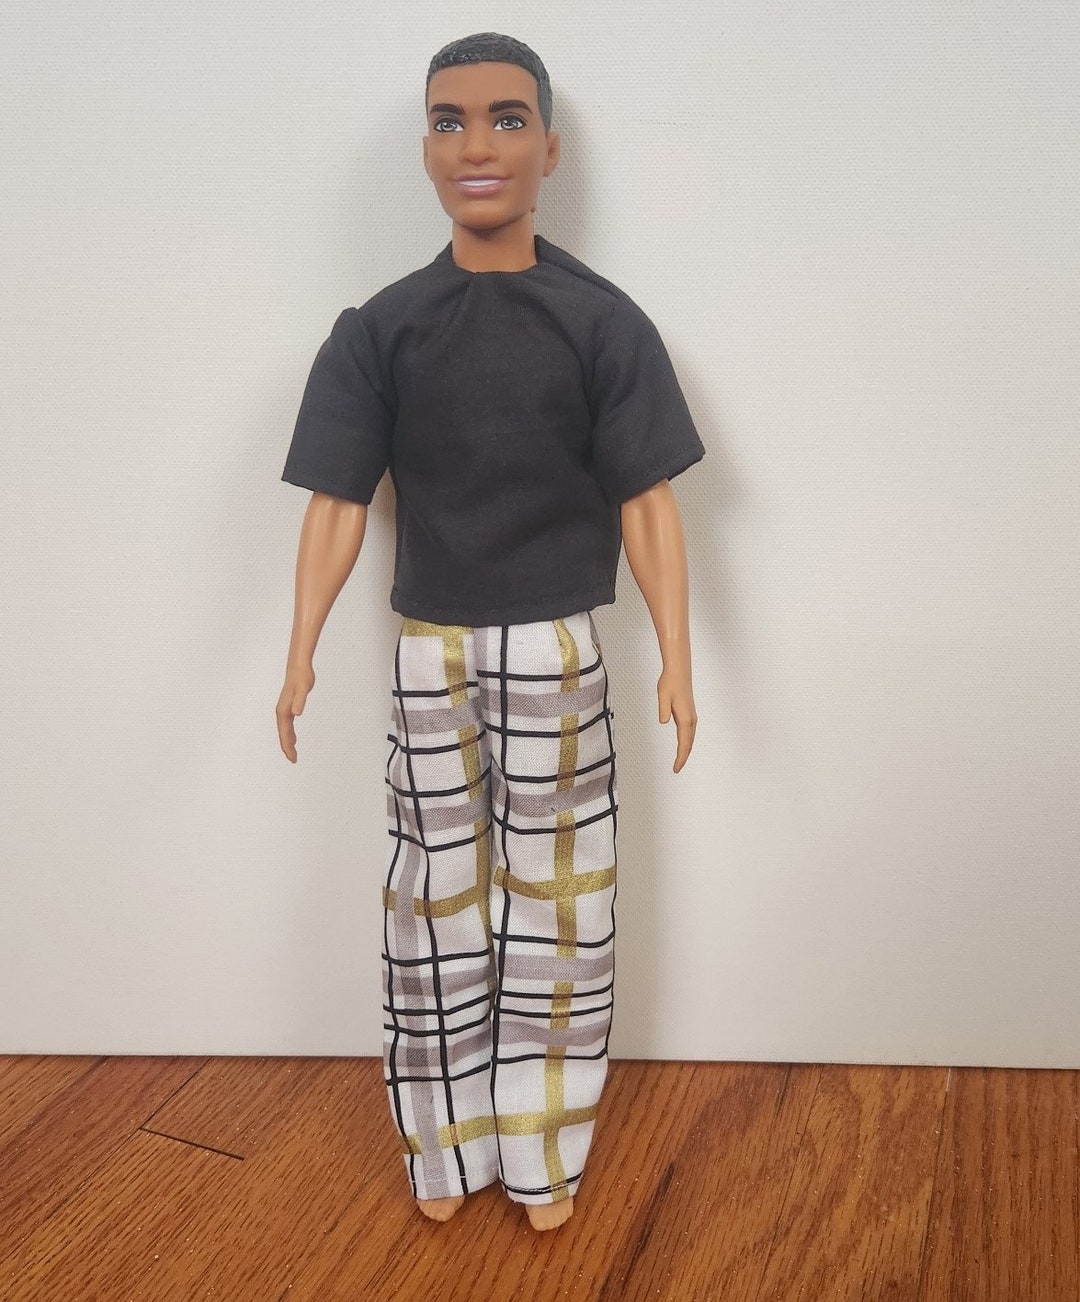 Handmade Doll Clothes Shirt and Pants Fits 12 Male Fashion Doll - Etsy